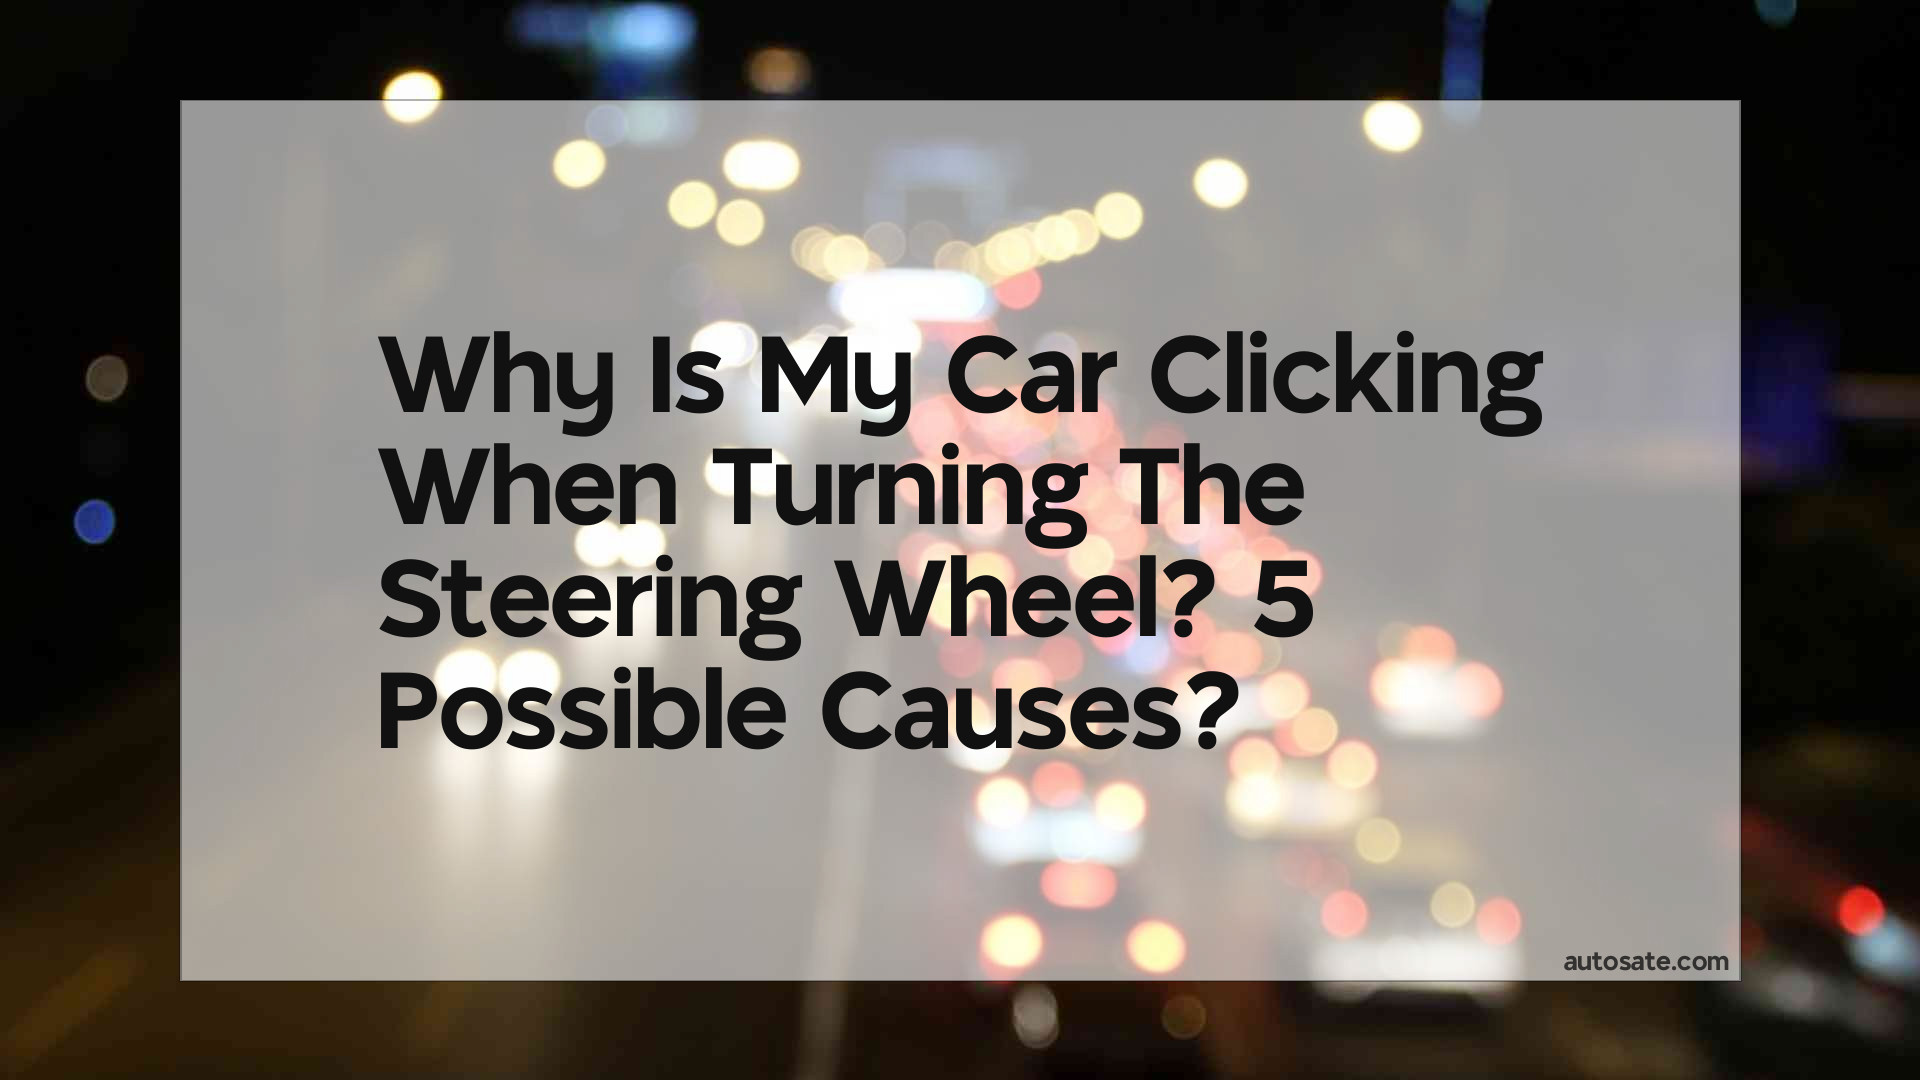 Why Is My Car Clicking When Turning The Steering Wheel? 5 Possible Causes